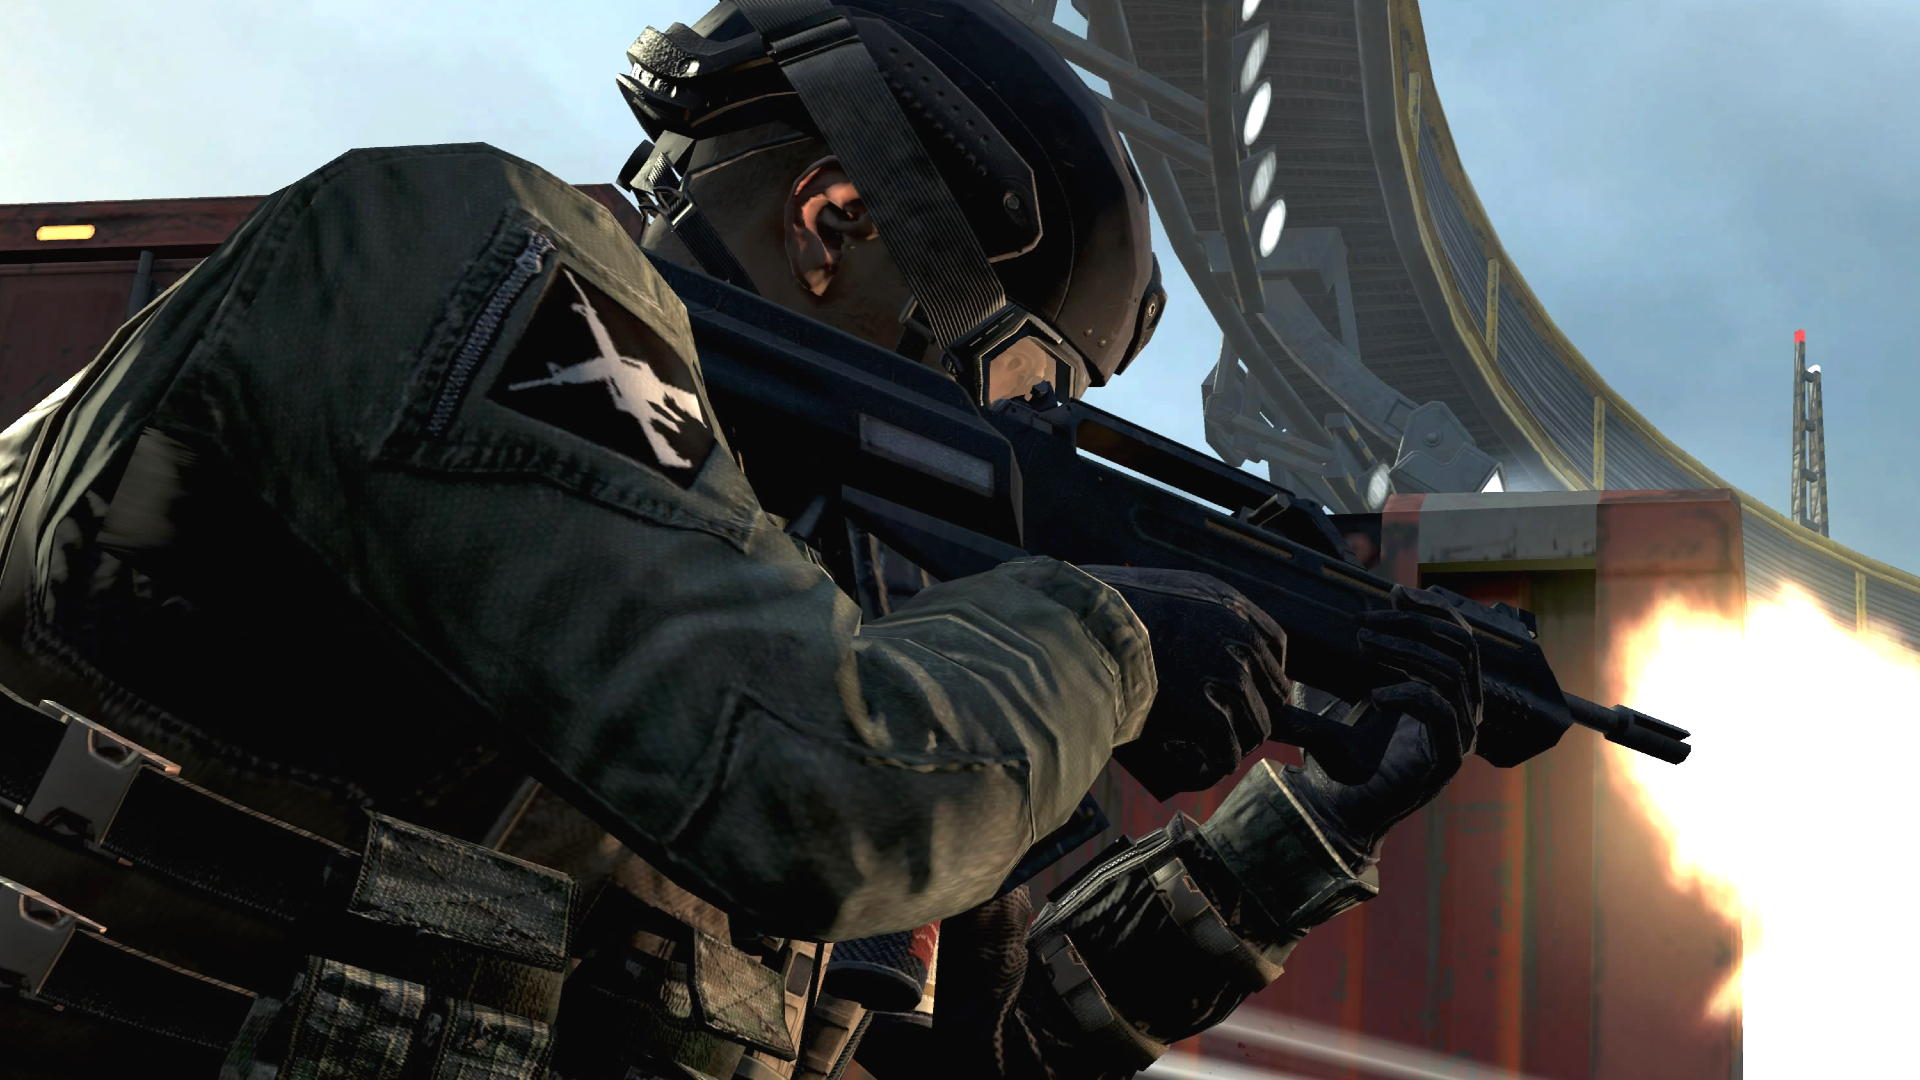 Gaming Deals UK on Twitter  Call of duty ghosts, Call of duty